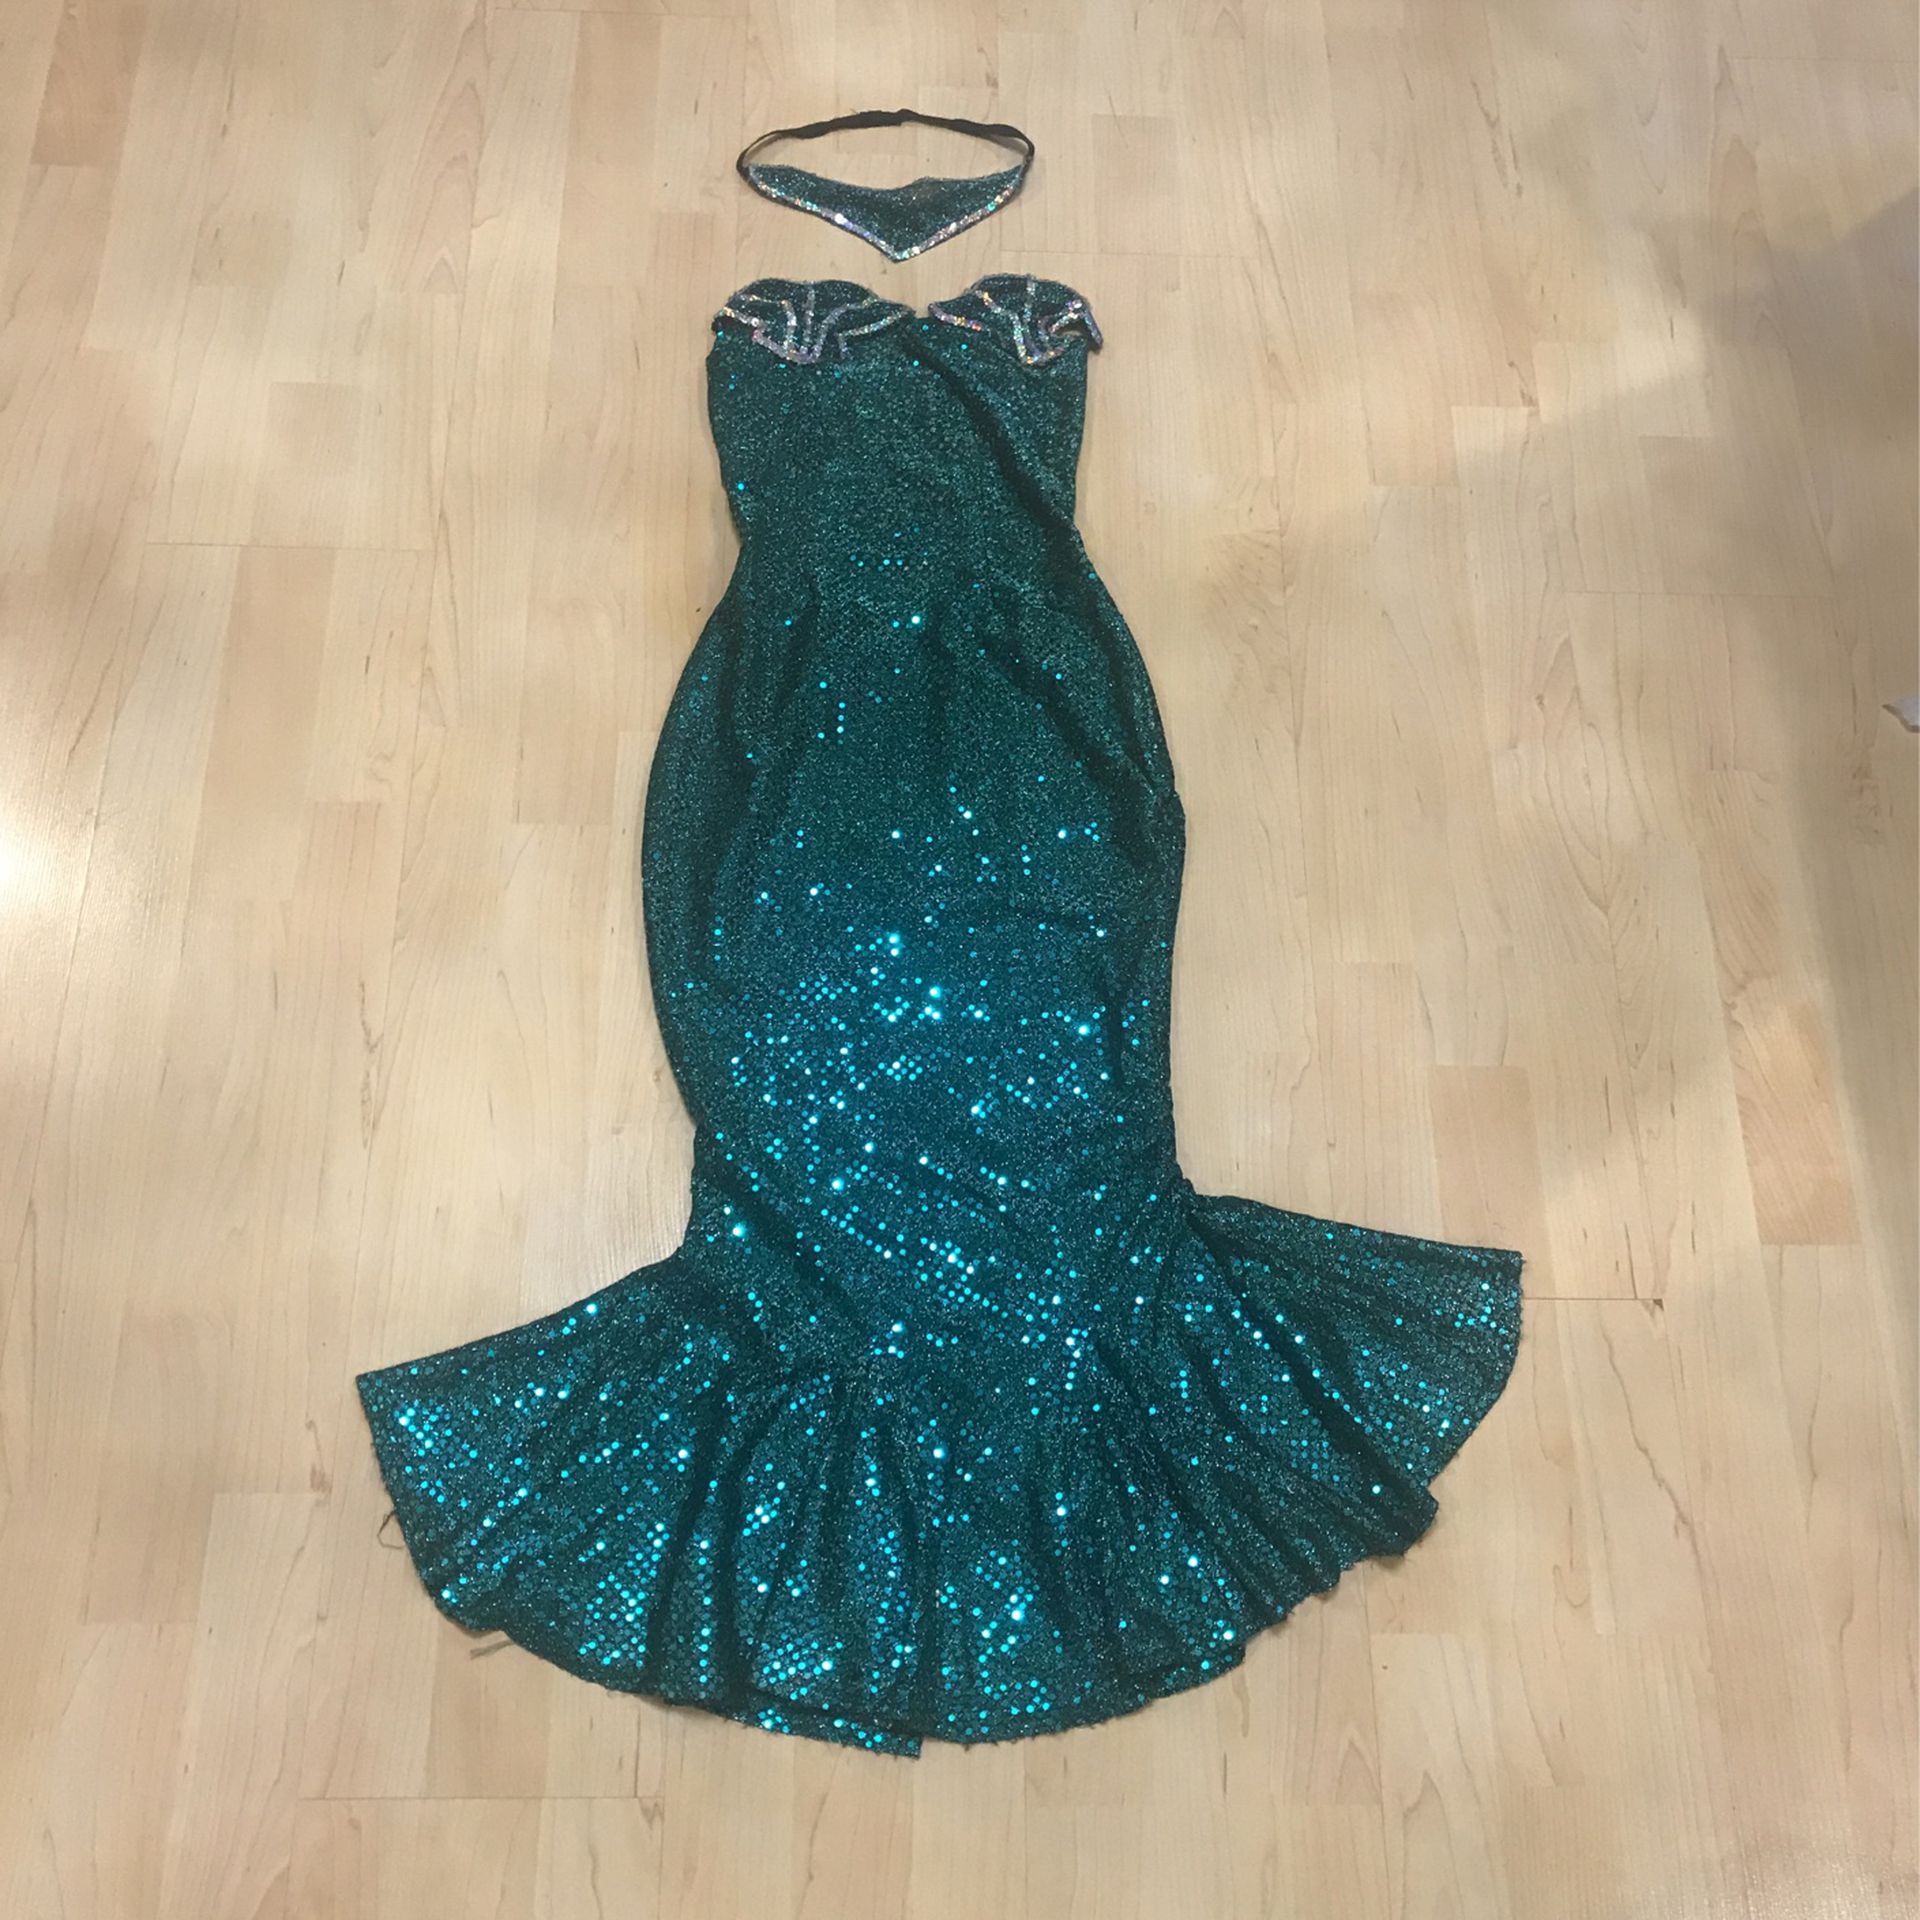 Mermaid Dress  Size7/8  It’s Pretty !! Perfect For Halloween. Get A Gift Too 